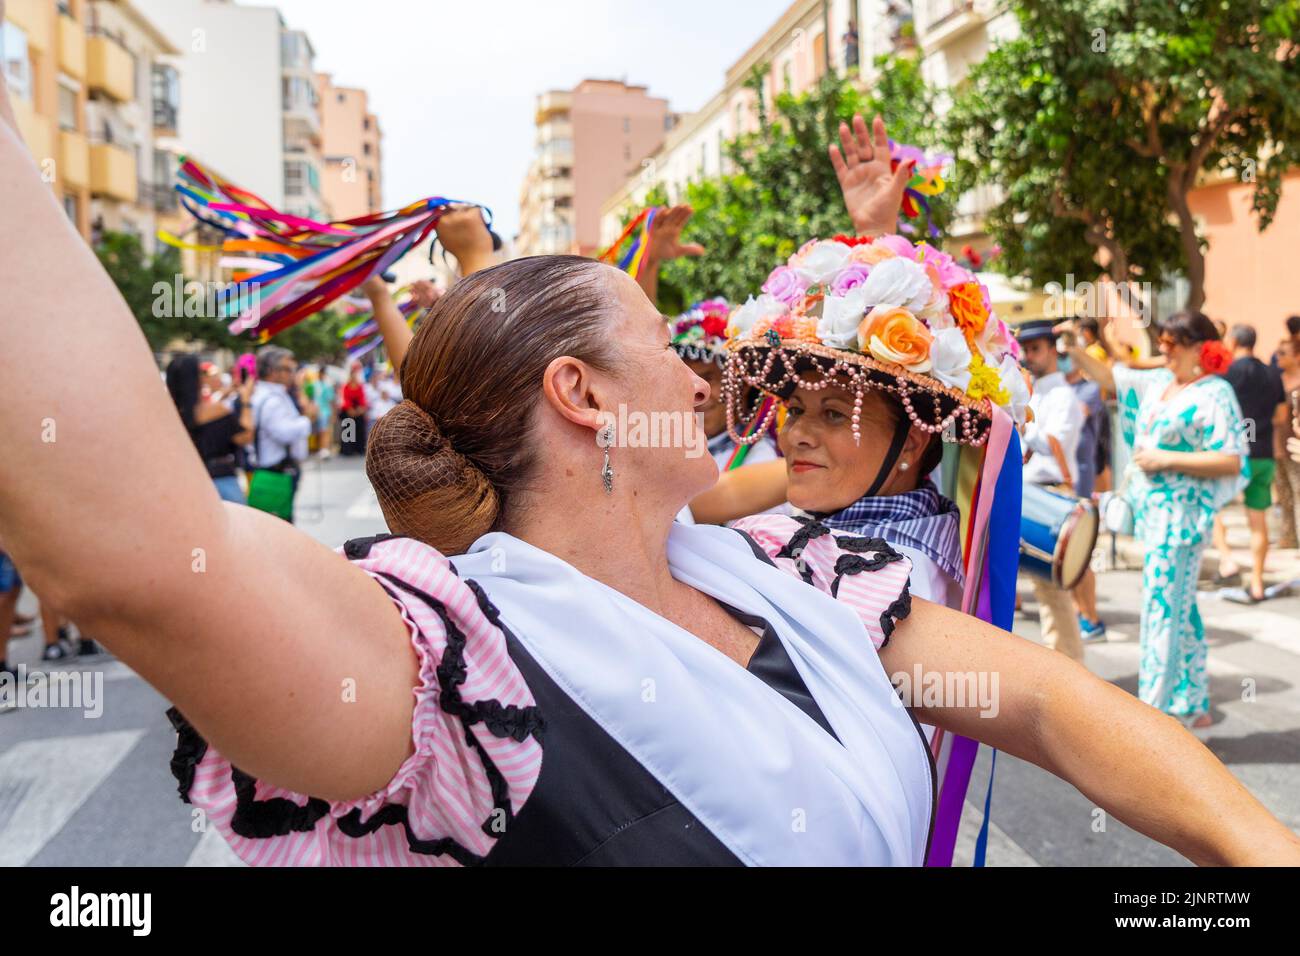 Two women seen dancing 'verdiales' during the first day of Malaga's Fair 2022. The Fair is being held for the first time since 2019. The 2020 and 2021 editions were suspended due to Covid19 pandemic. Stock Photo